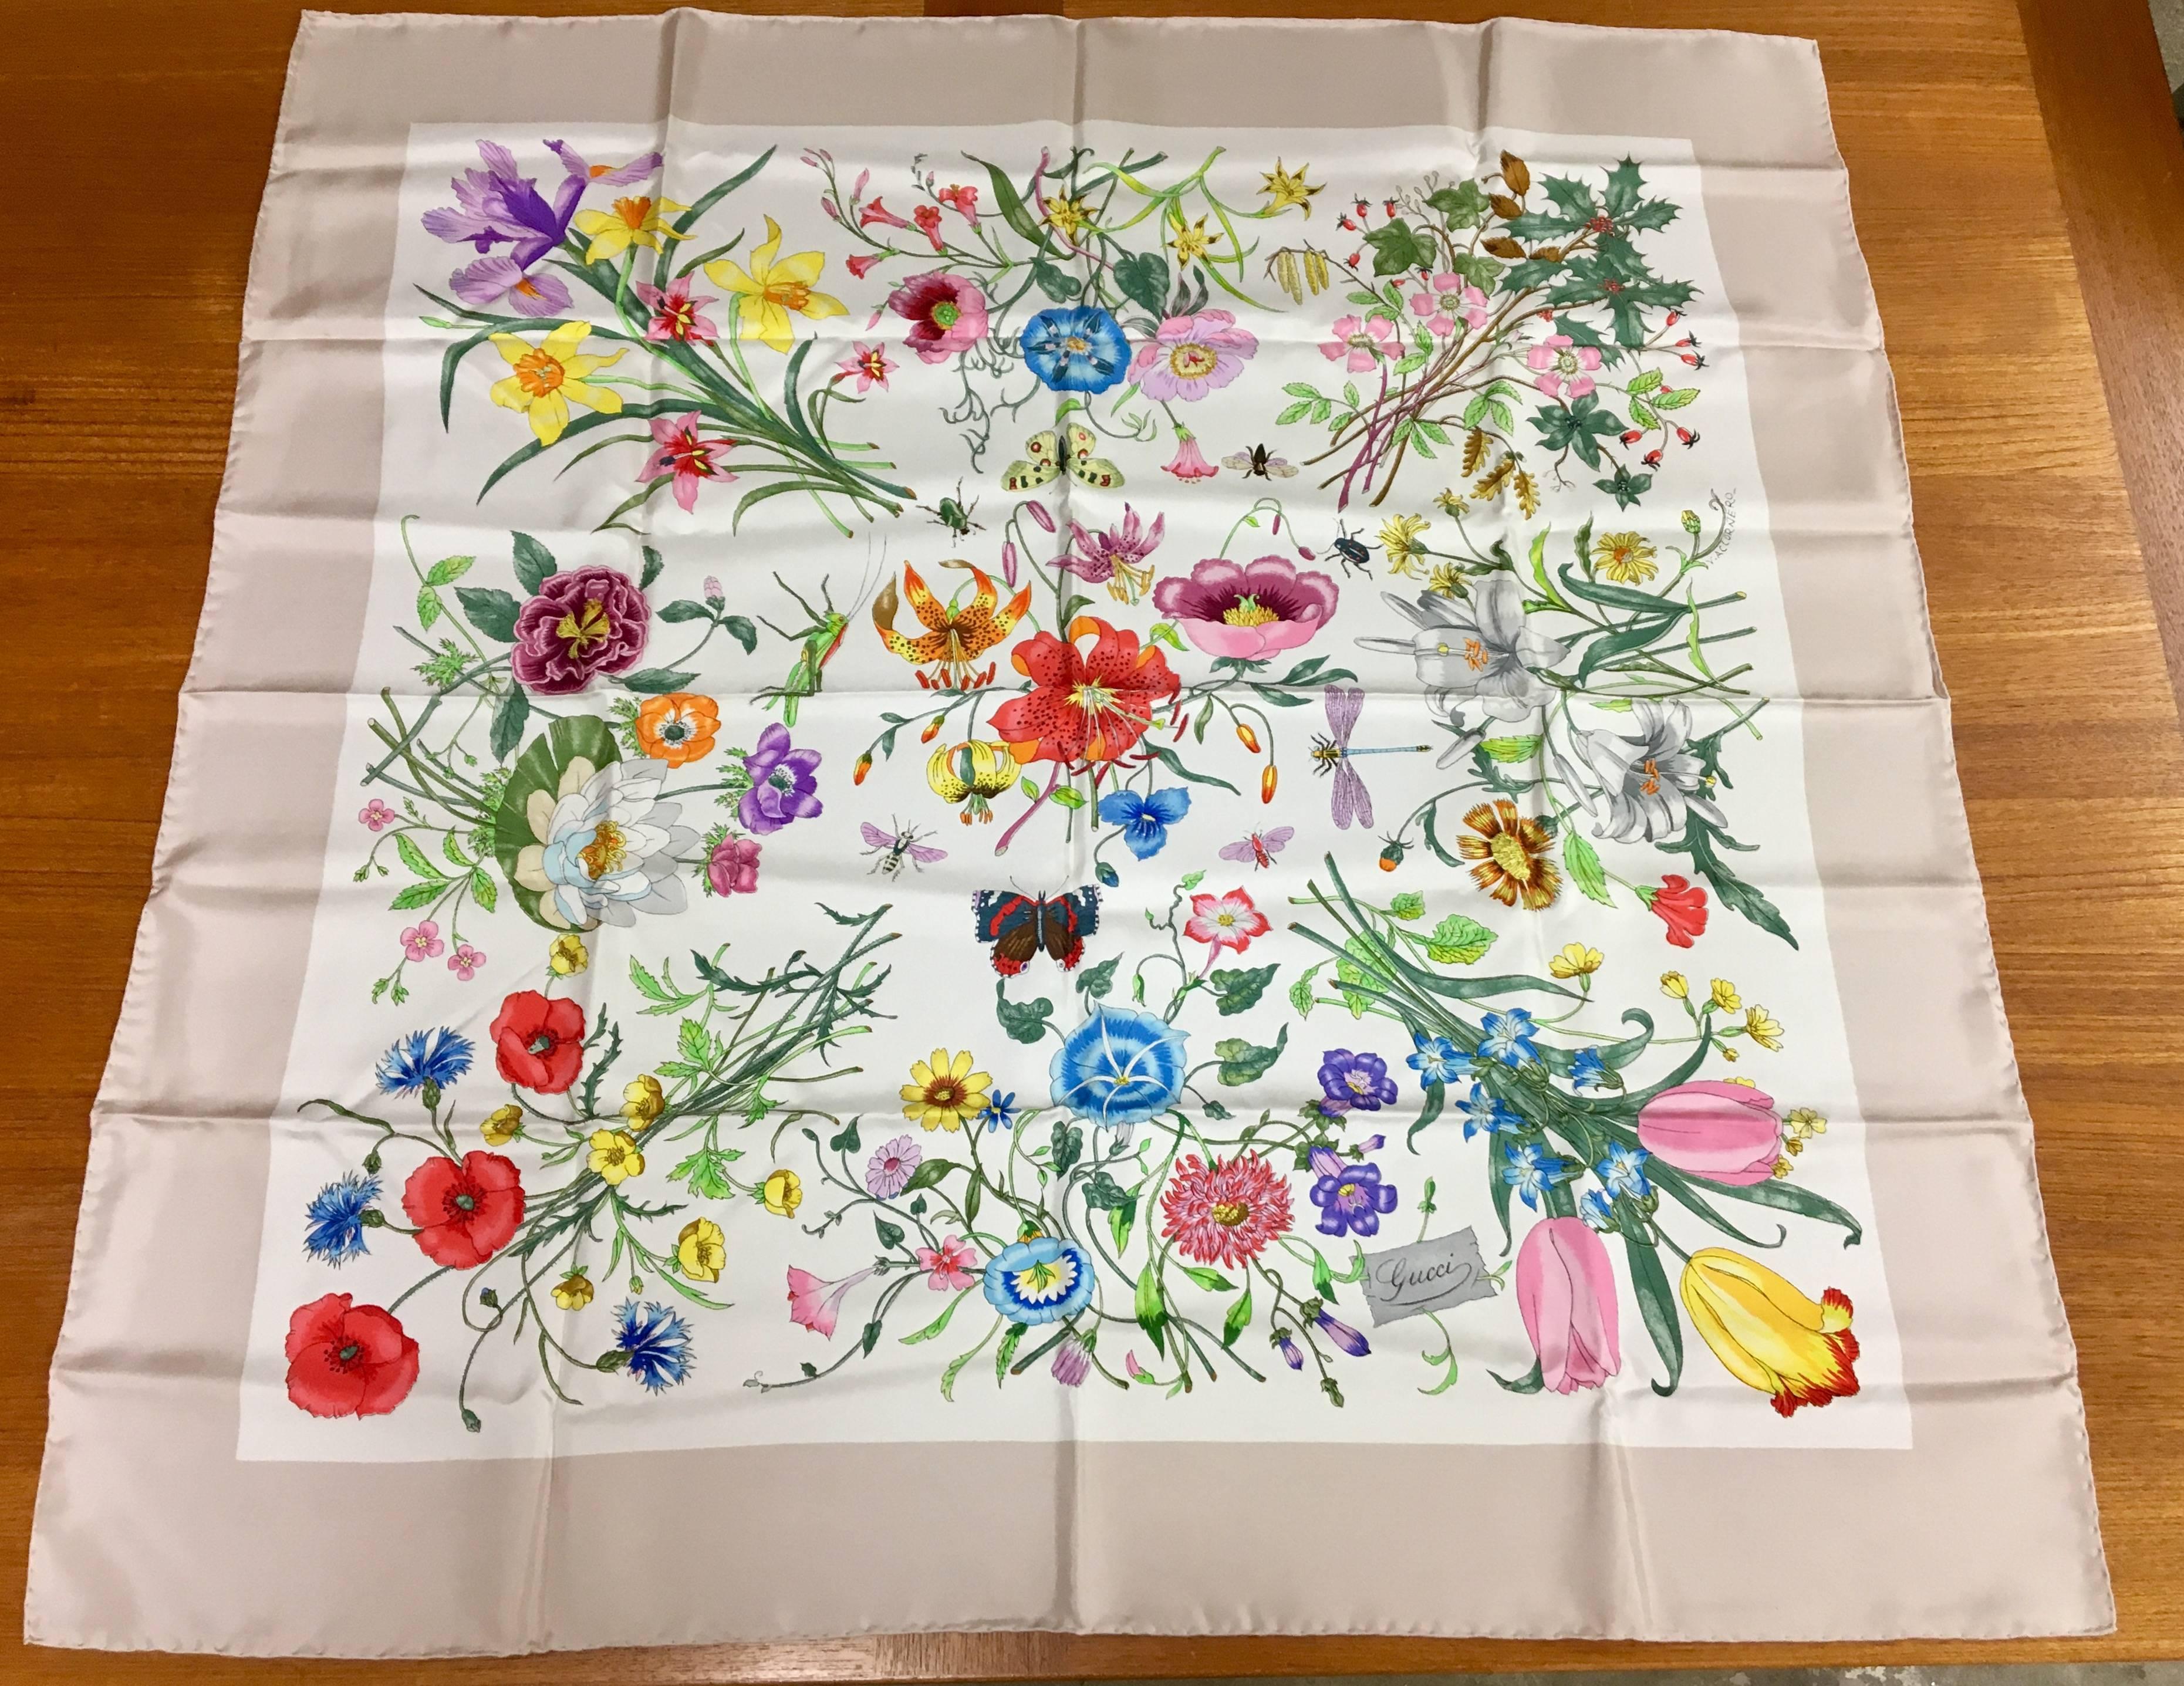 Elegant, vintage, Gucci, hand rolled silk scarf with original Gucci box. The scarf has never been used and is in excellent condition. The piece is signed and was designed in a floral pattern by Accornero. It was purchased in Florence, Italy in the